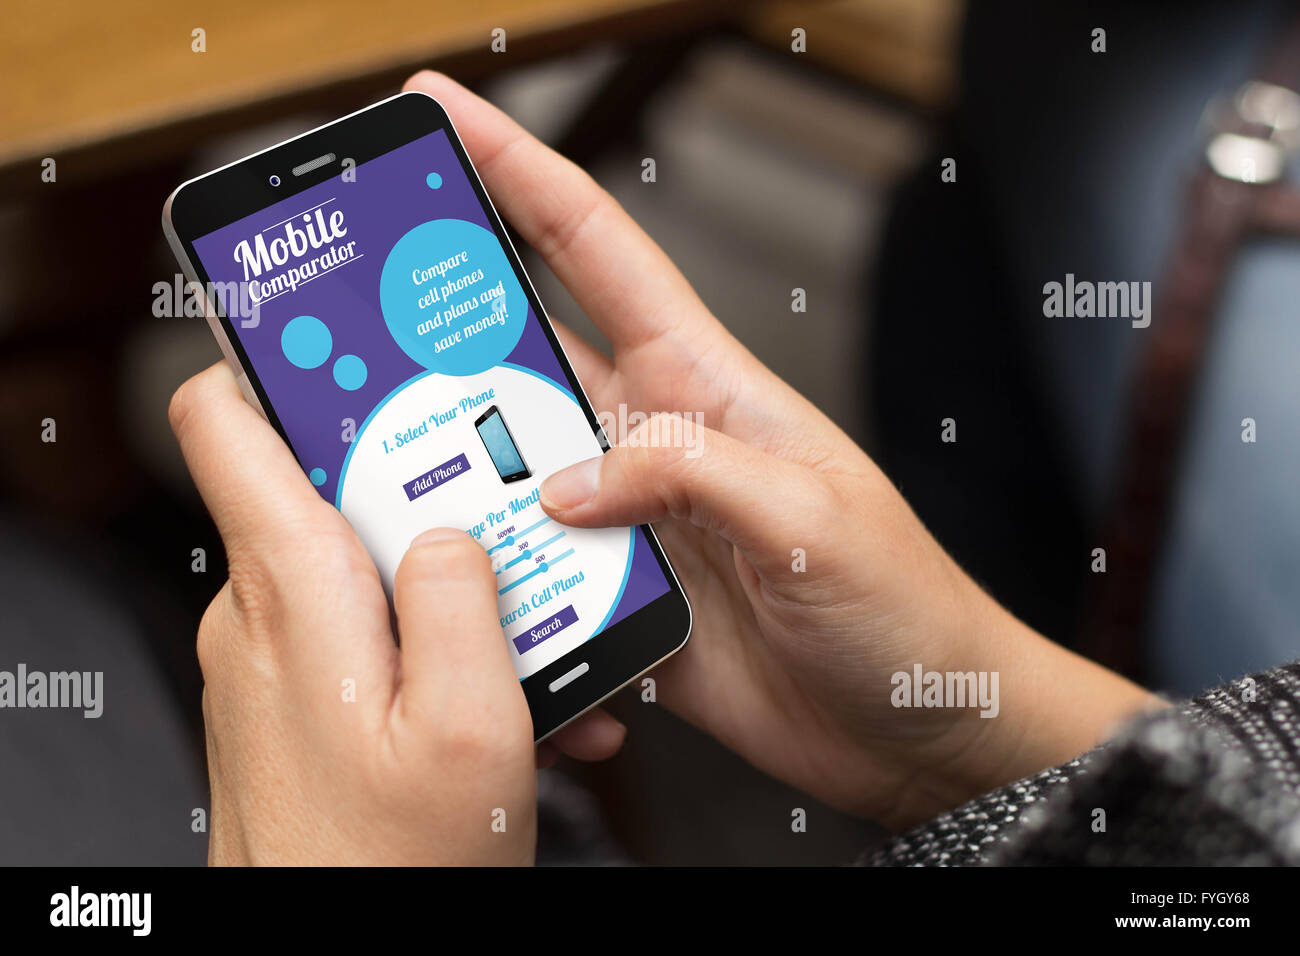 connectivity concept: girl using a digital generated phone with mobile comparator on the screen. All screen graphics are made up Stock Photo